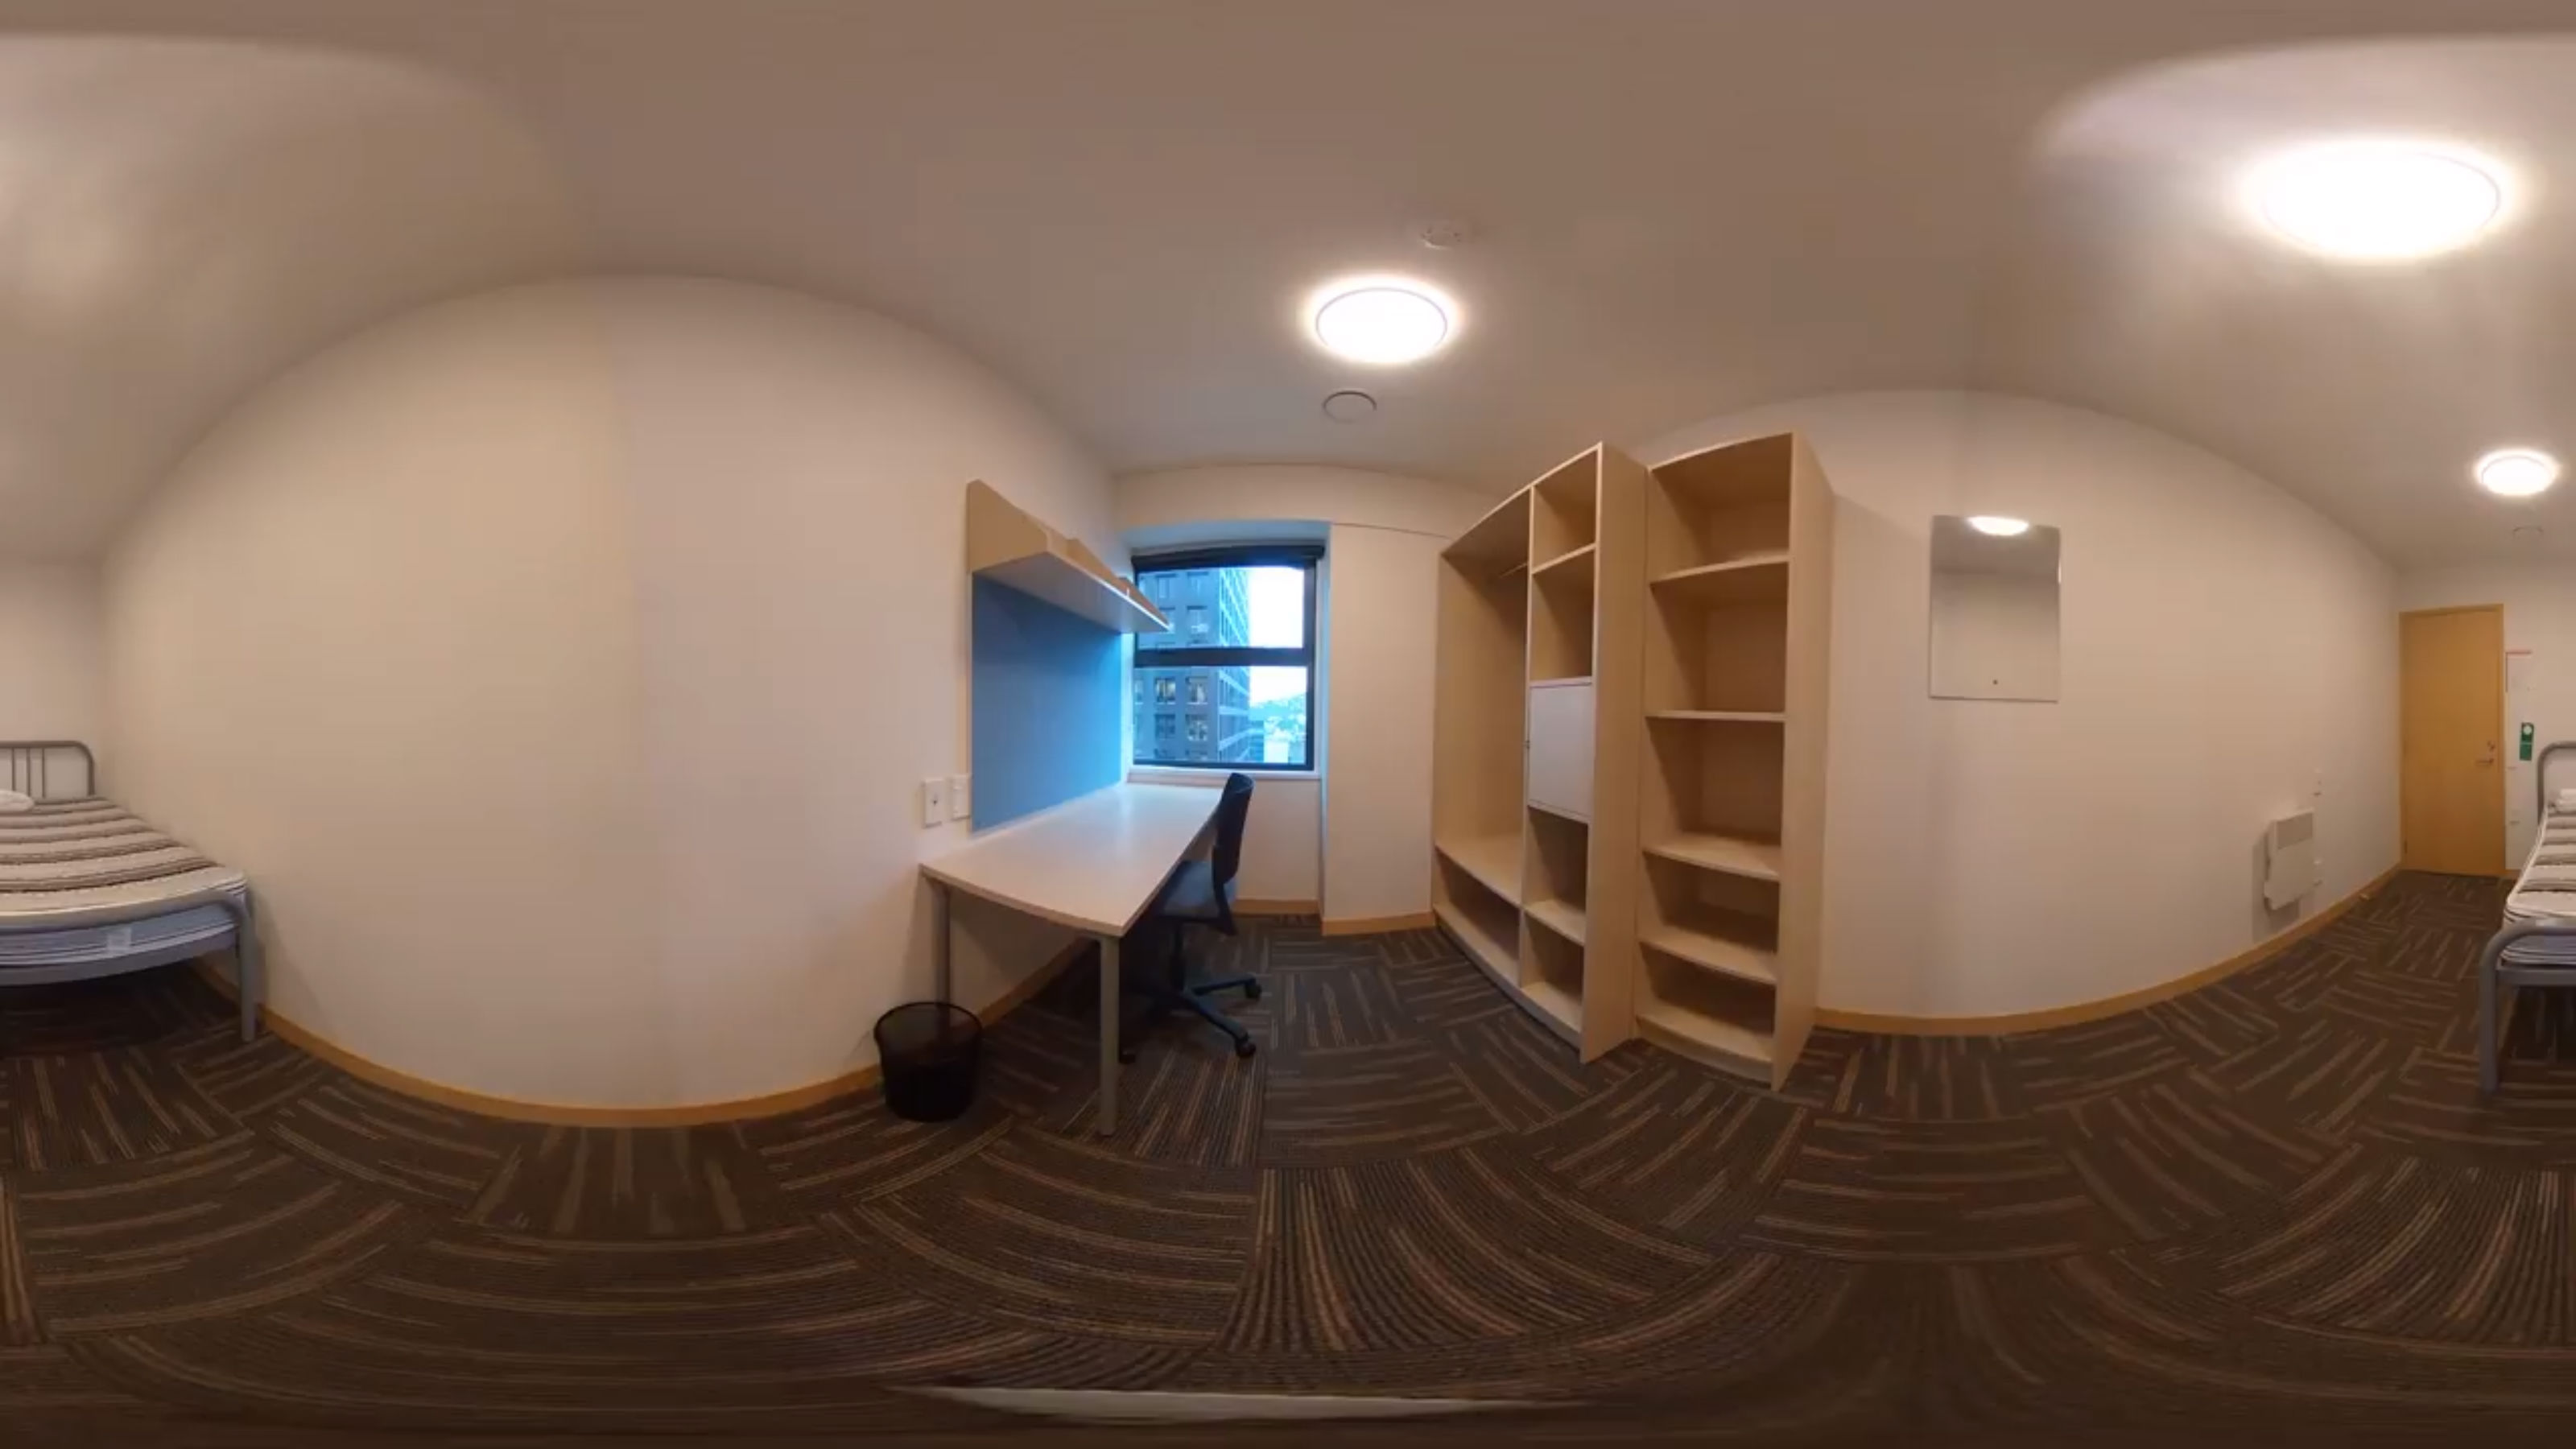 A panoramic view of a single room with a desk and empty wardrobe.